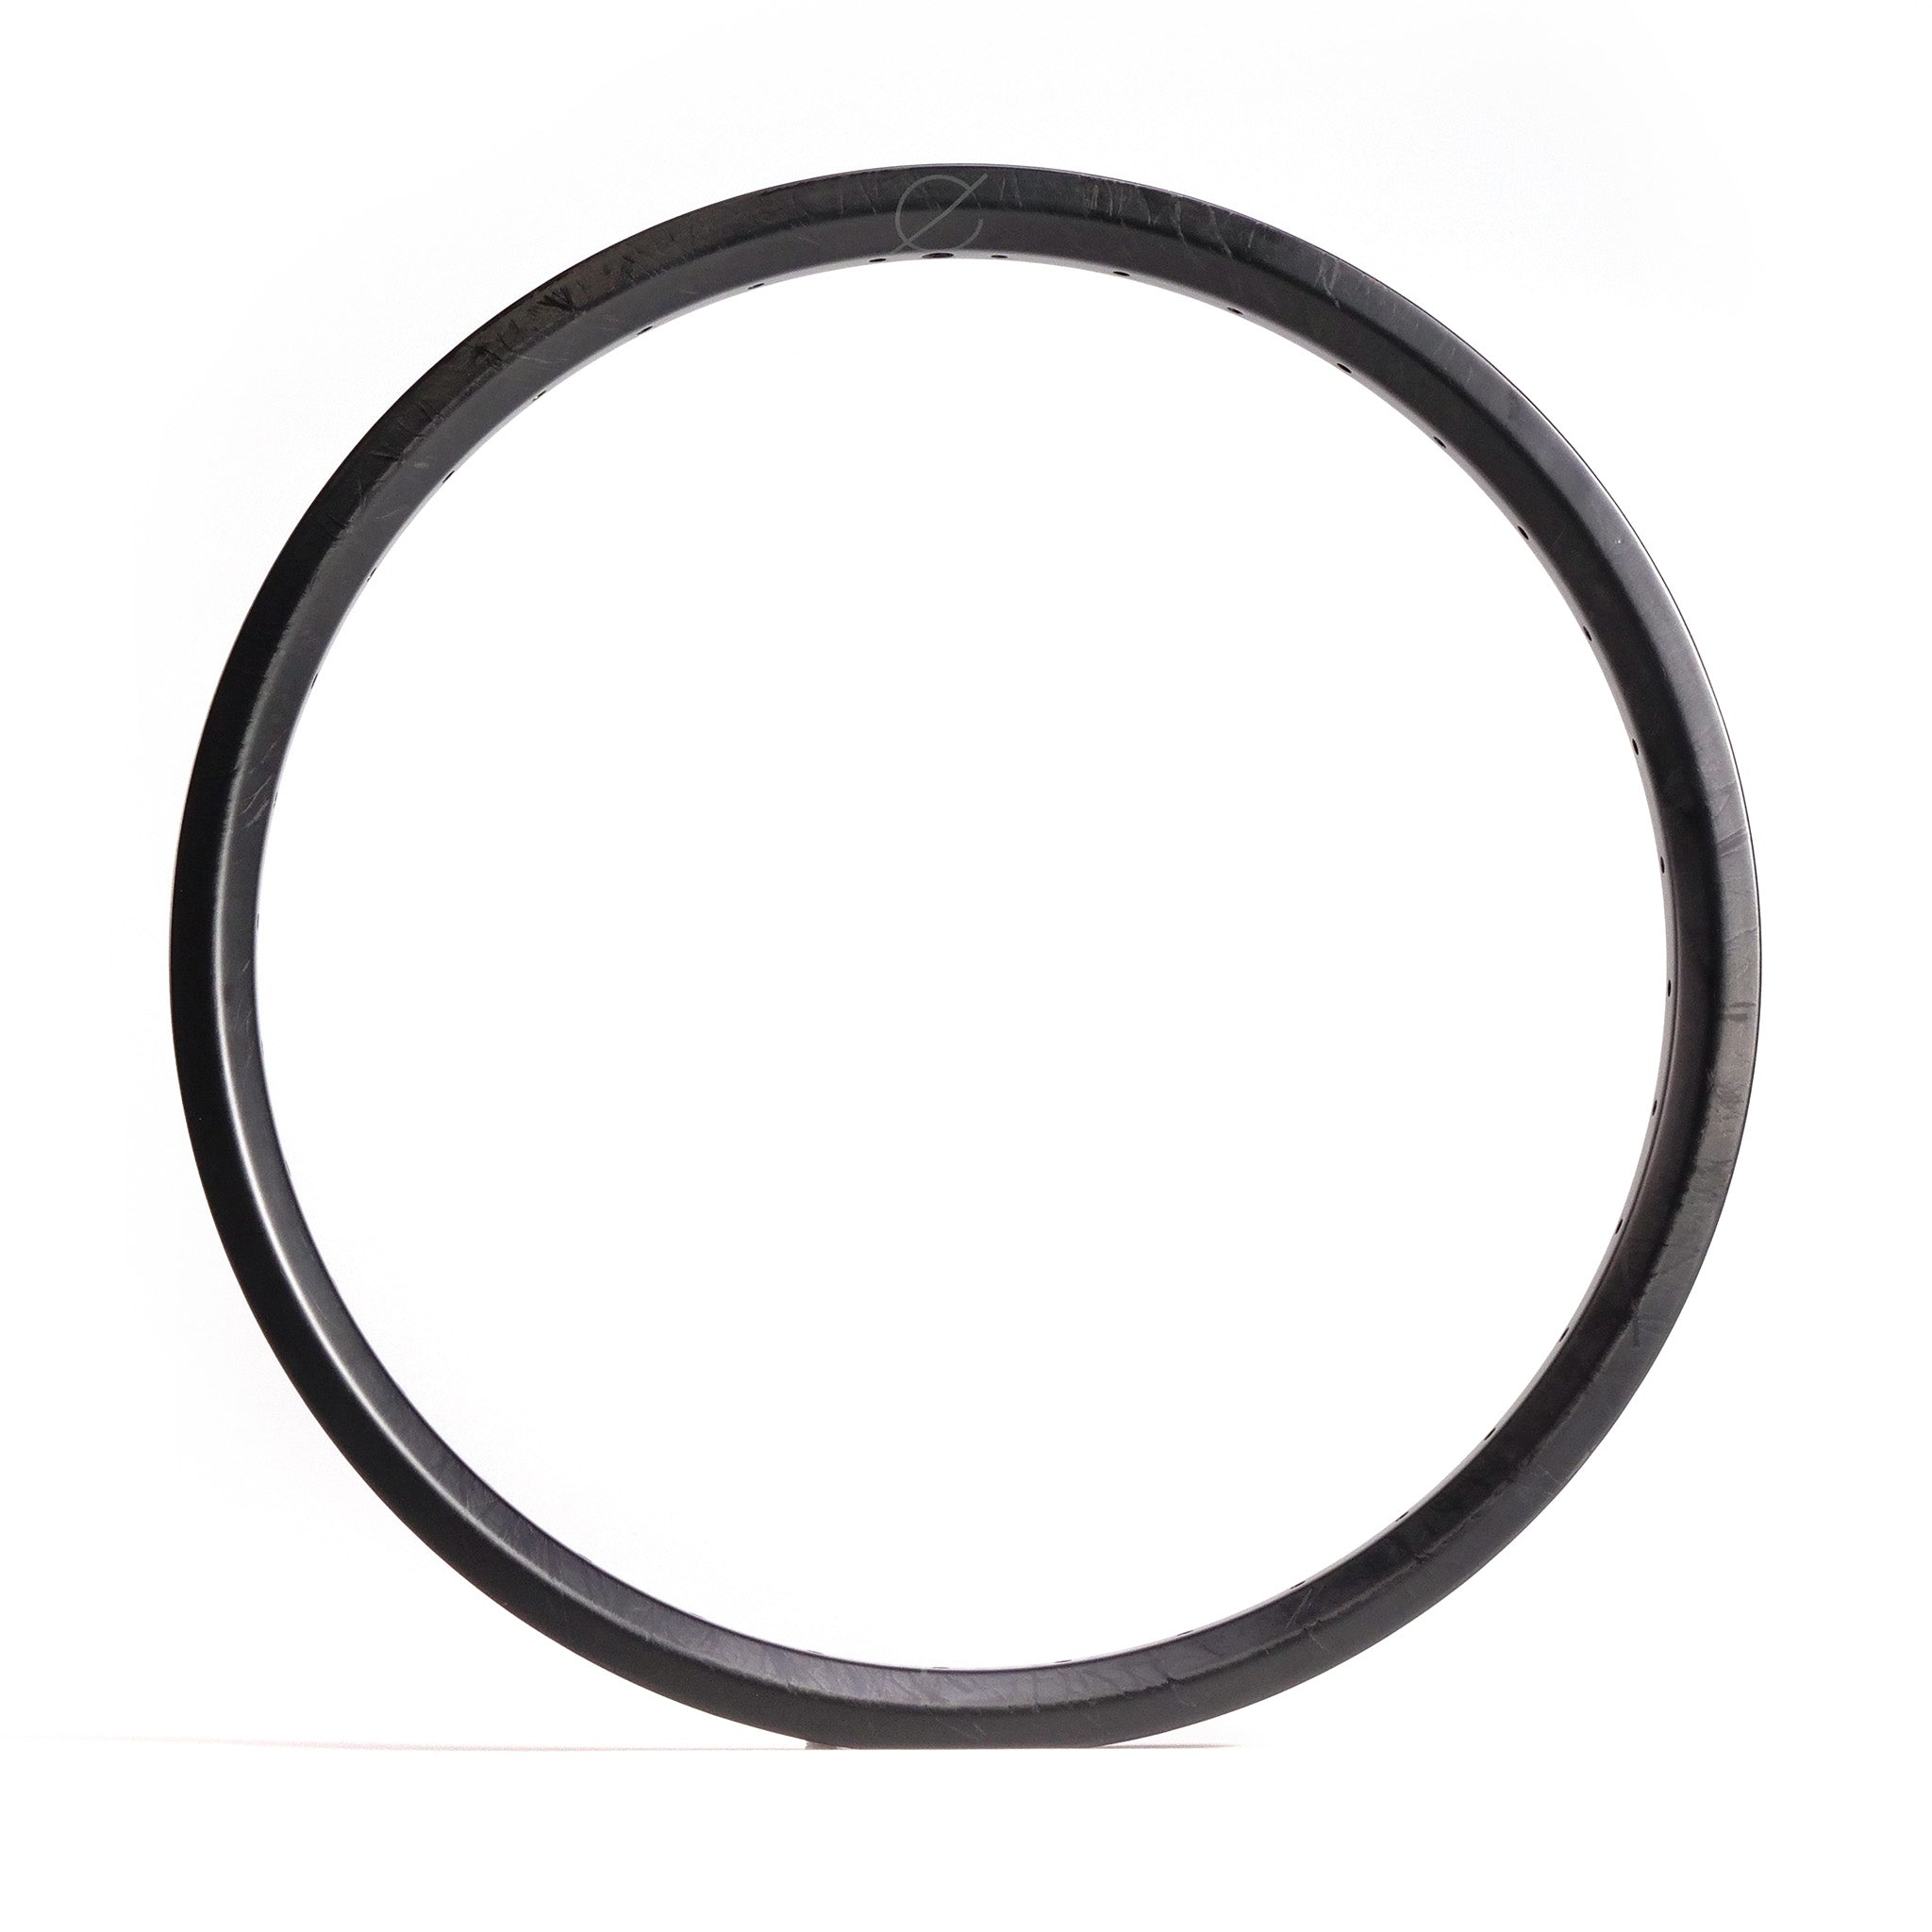 A black circular hoop with a thin profile against a white background, reminiscent of the sleek design found in BMX race and freestyle Spectre NME Carbon Fibre 20 Inch Brakeless Rim.